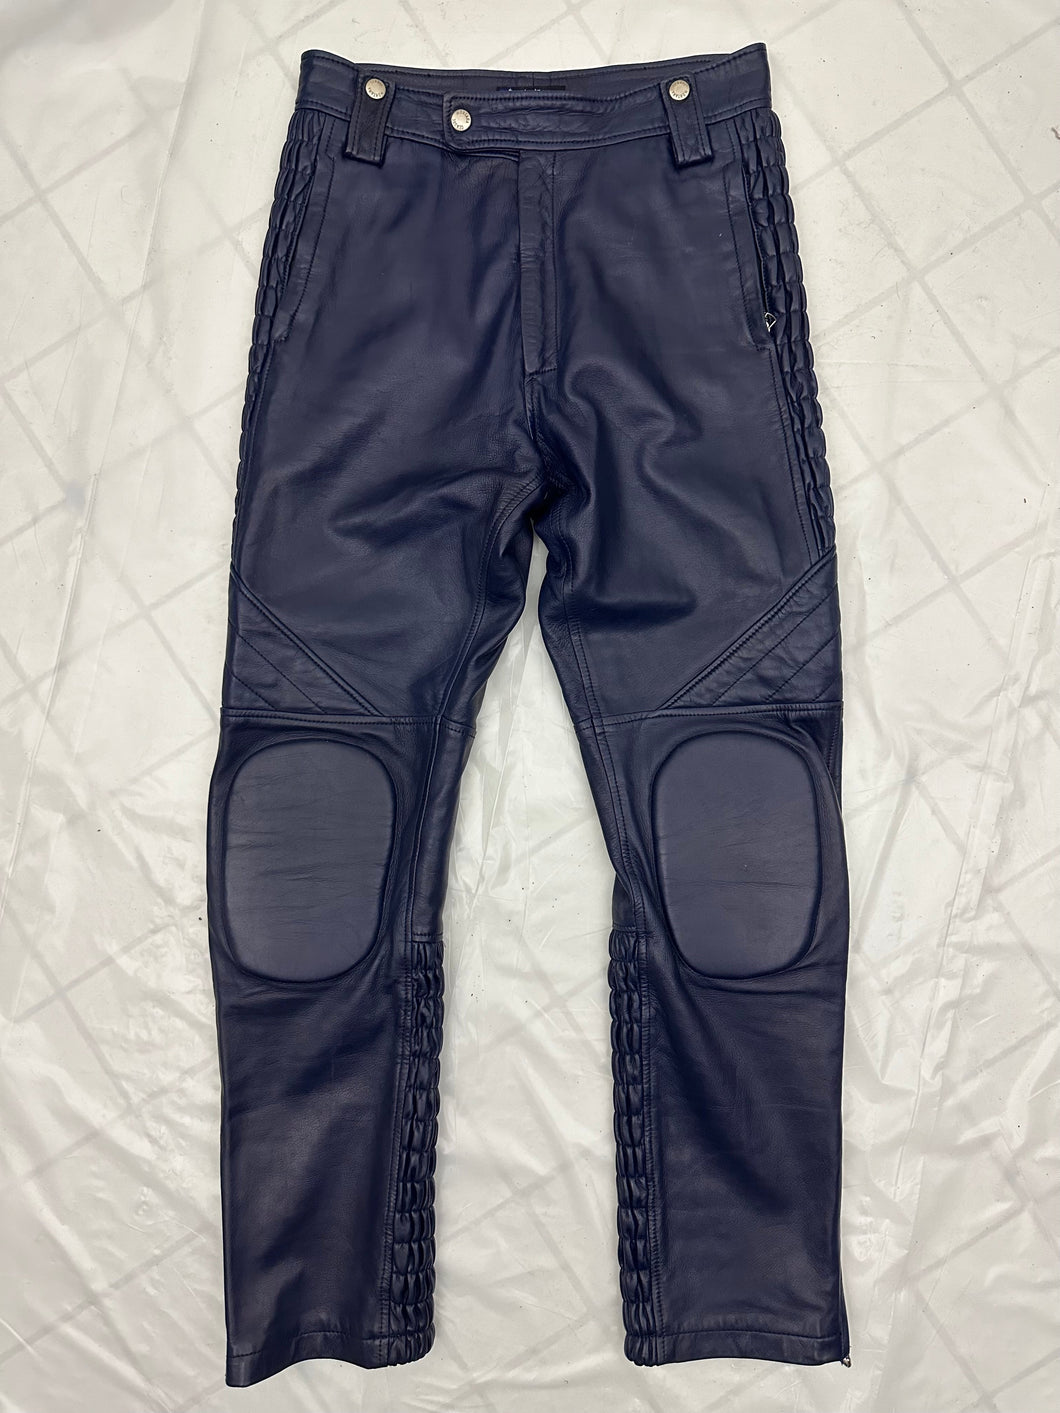 1980s Claude Montana Padded Leather Moto Pants - Size L